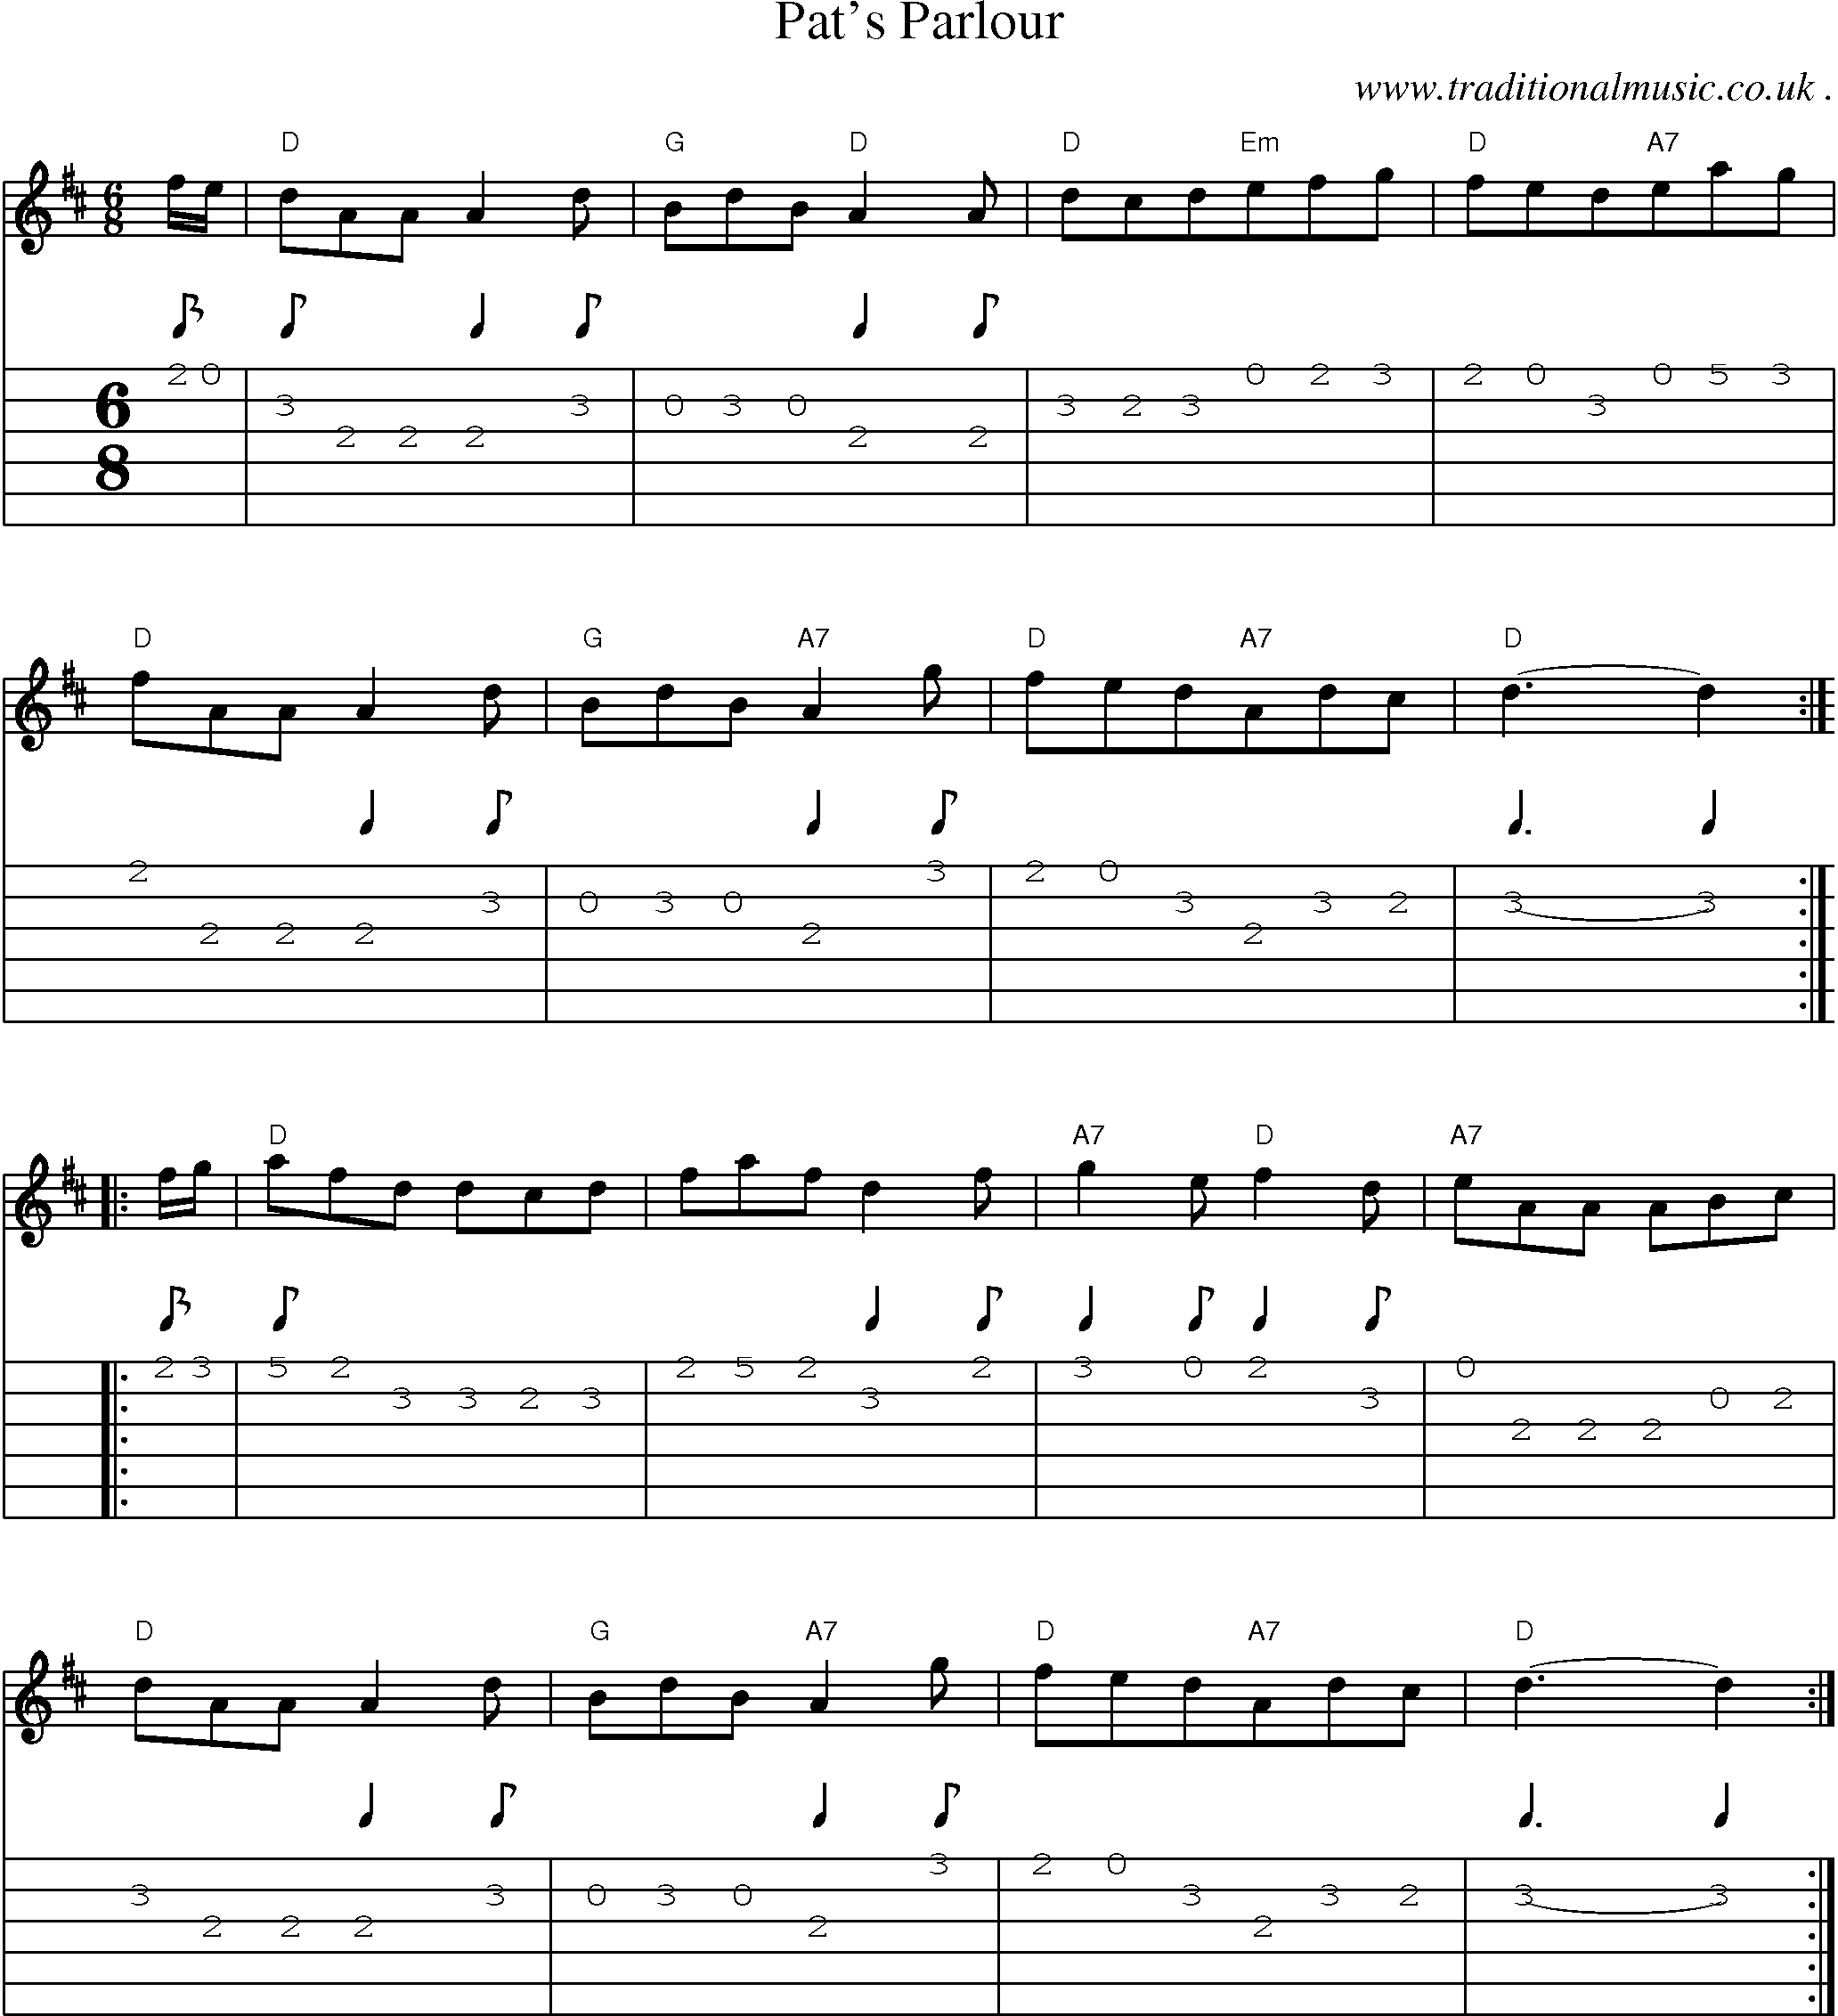 Sheet-Music and Guitar Tabs for Pats Parlour